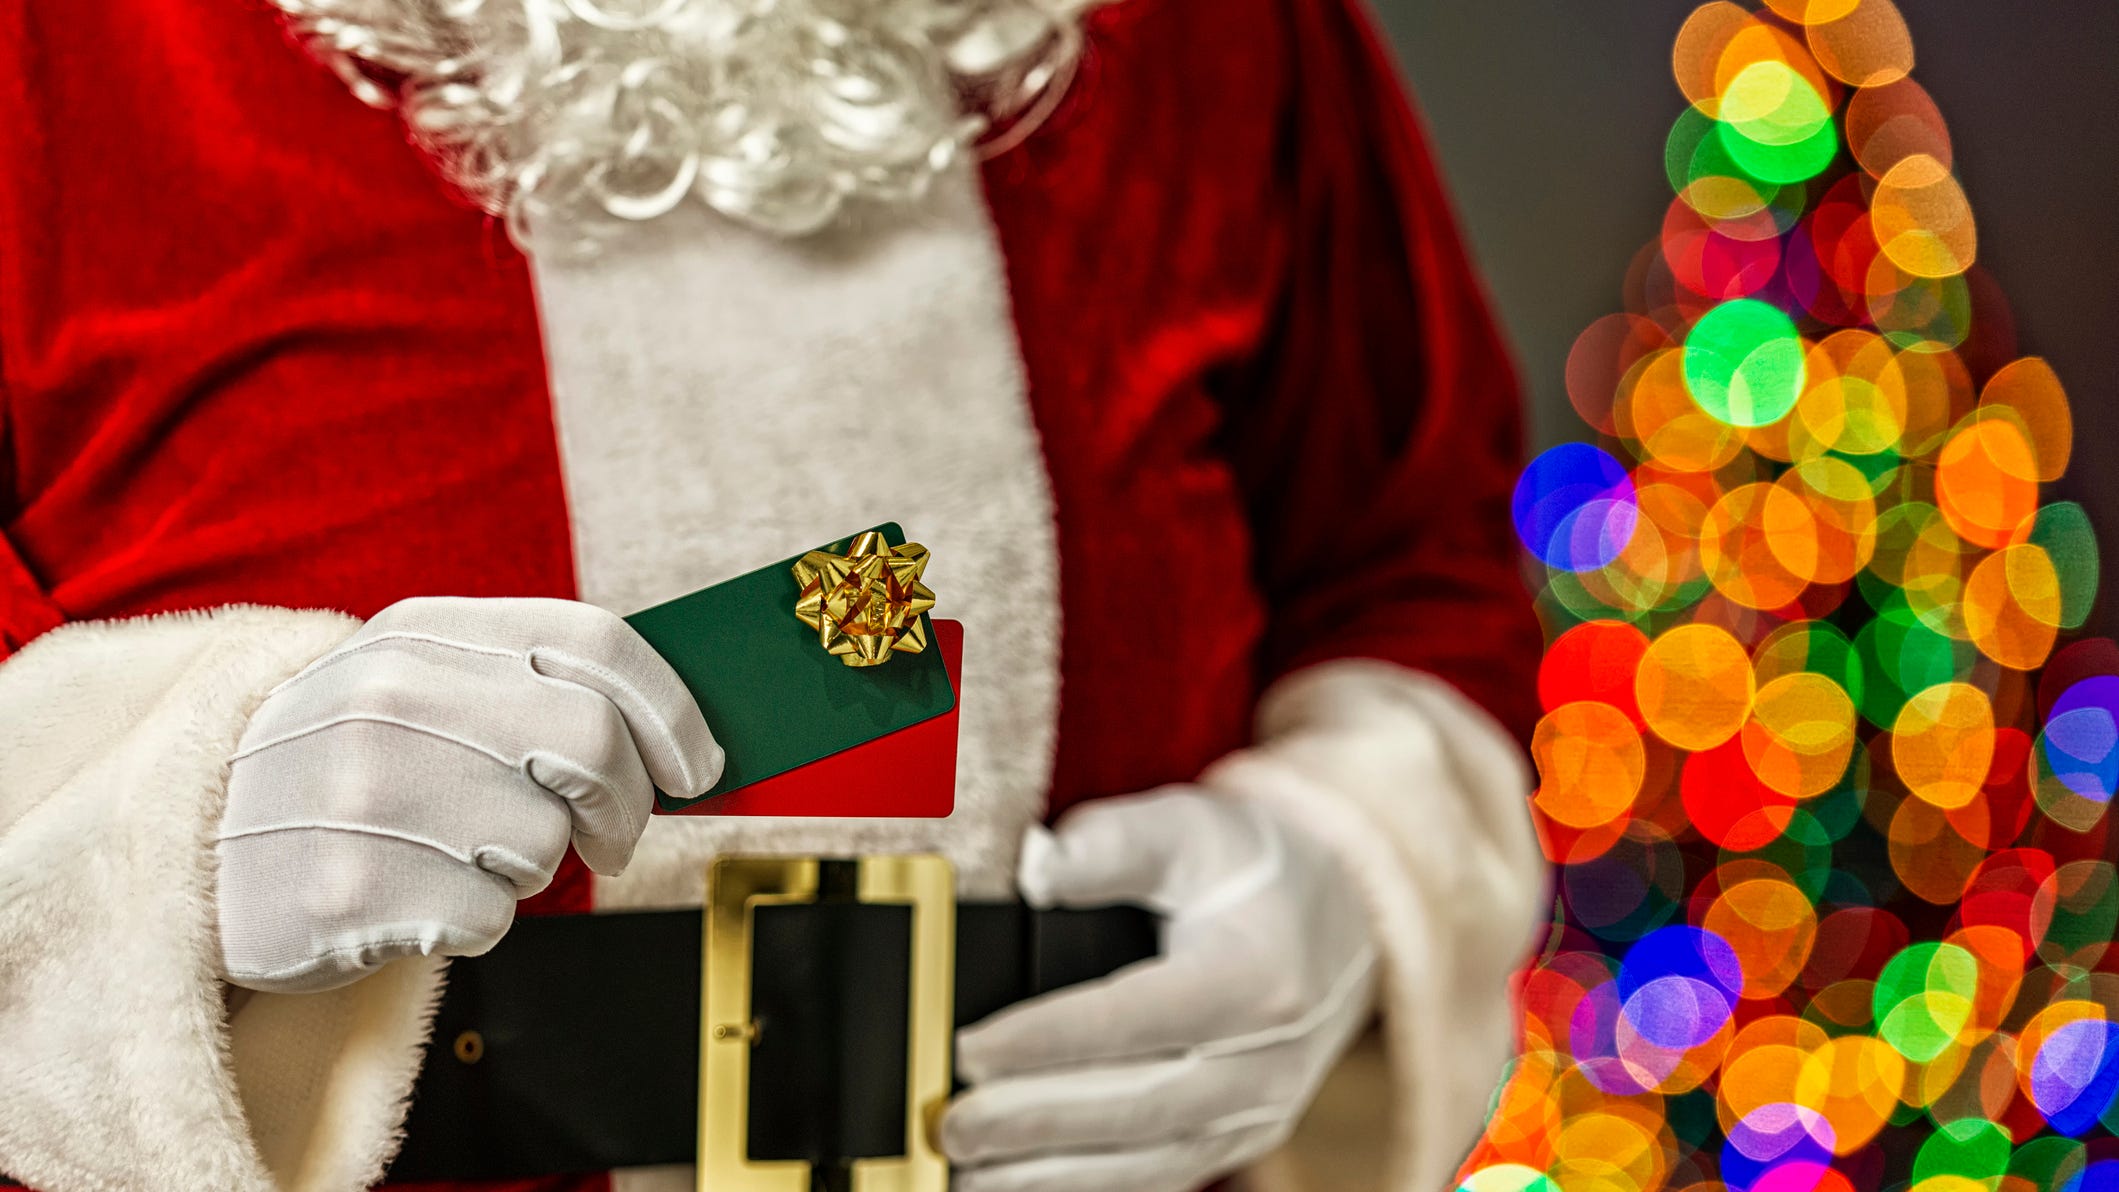 Did you get gift cards in your Christmas stocking? How to check card balances and other tips